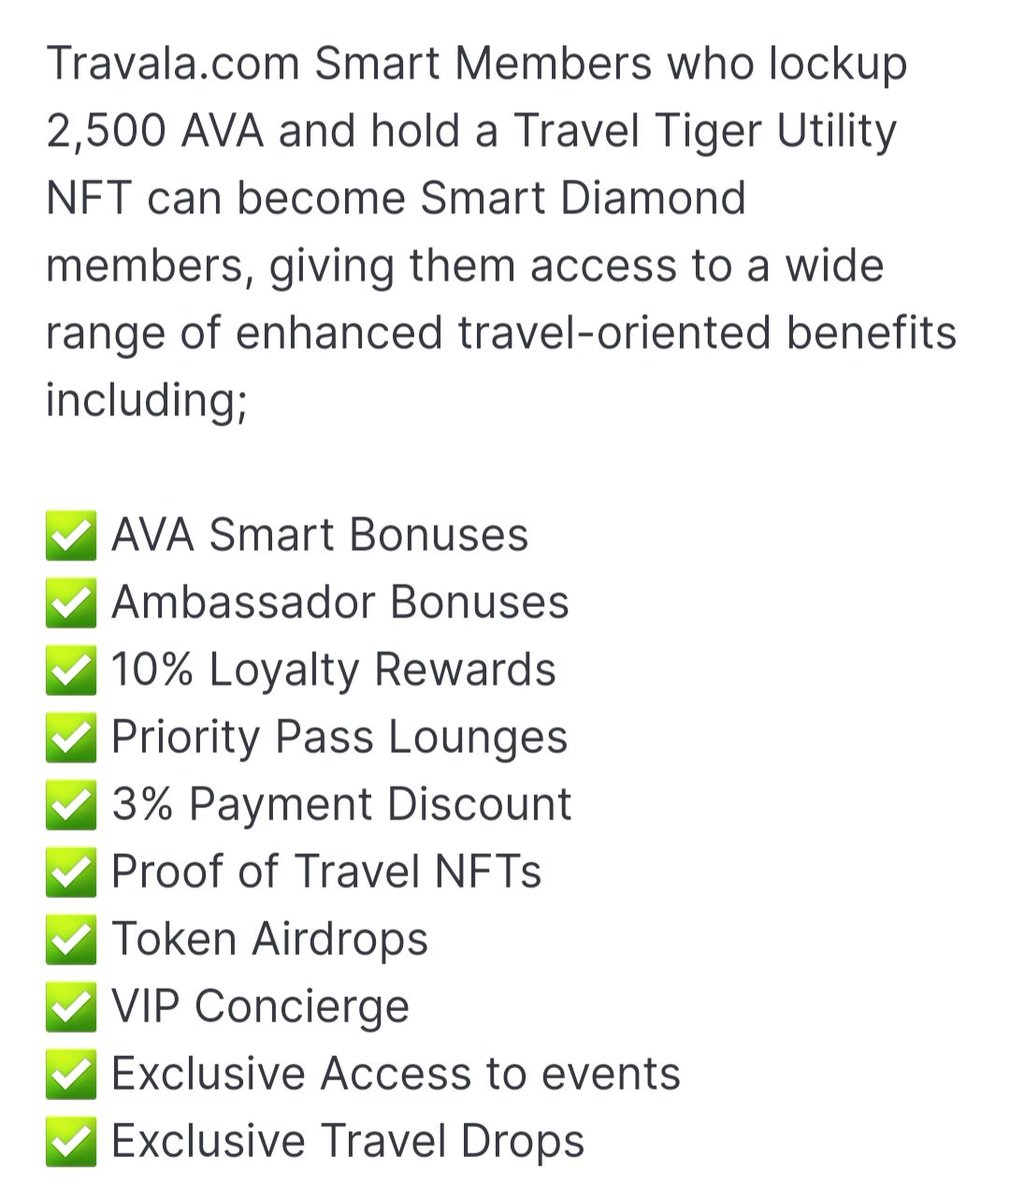 Just claimed my quarterly Ambassador bonus for the marketing task, around $158 in travel credits to book new hotels/flights!😎

This Ambassador bonus plus the 10% cashback on hotels are some of the best nft perks I know🔥

@travalacom #TravelTigerClub